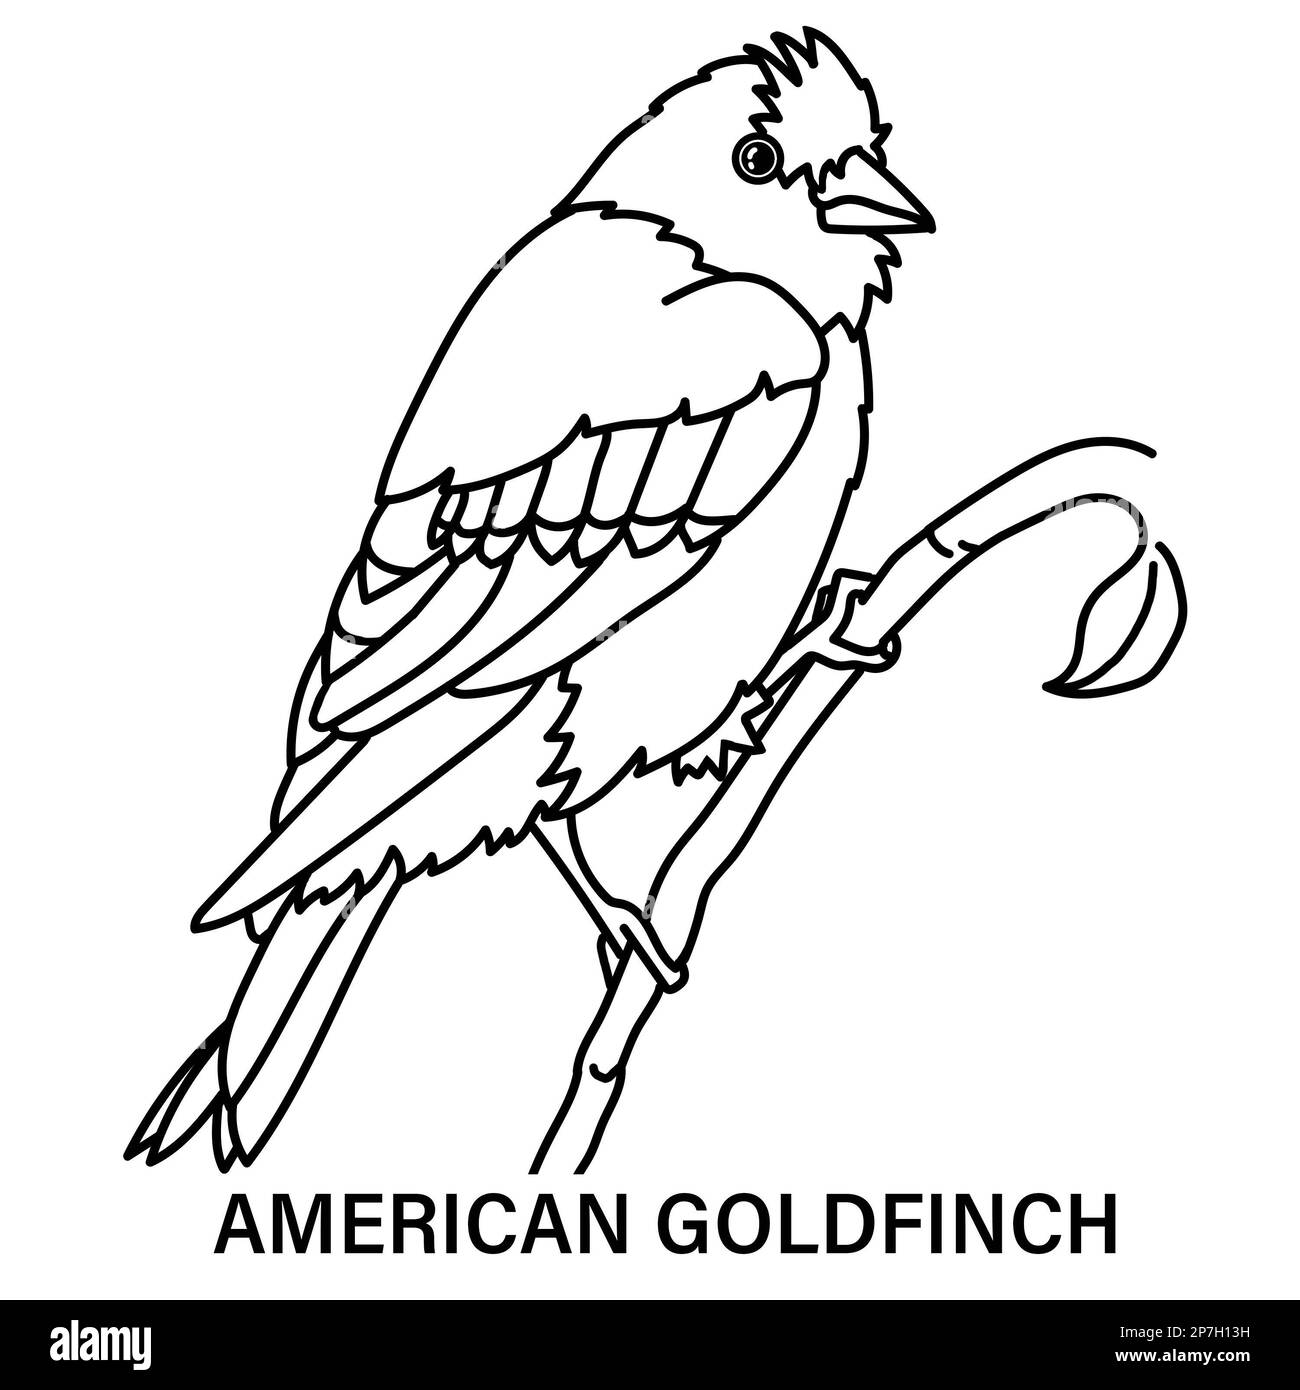 Illustration of a male American goldfinch on a white background. Coloring page for fun or learning. Also called wild canary. Stock Photo